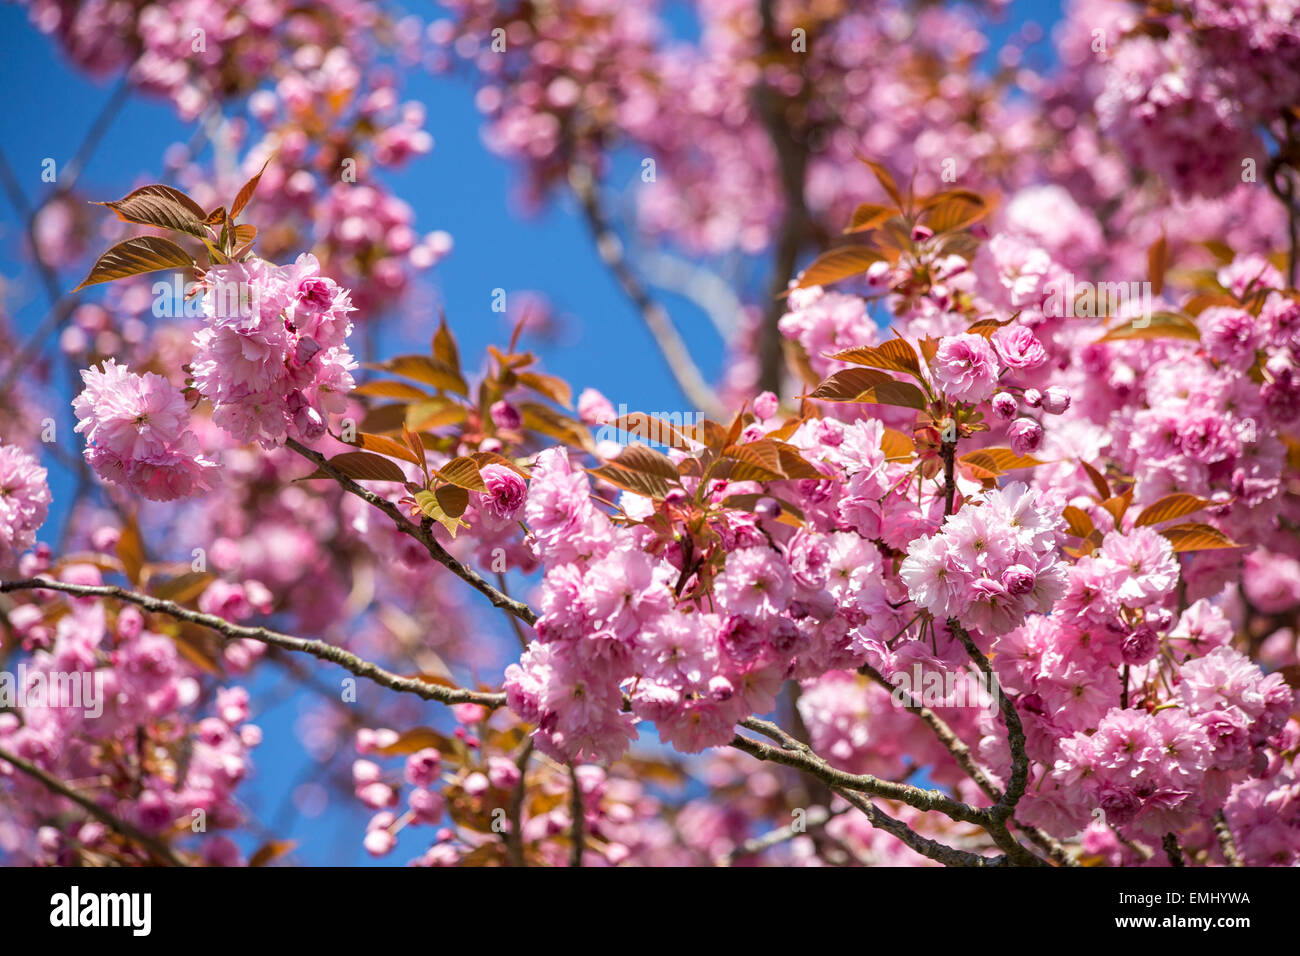 Corsham, UK. 21st Apr, 2015. The historic town of Corsham was the setting for the recent BBC drama Poldark. This Spring it is also home to a beautiful display of cherry blossom which is admired by the public enjoying the recent warm sunshine. Credit:  Wayne Farrell/Alamy Live News Stock Photo